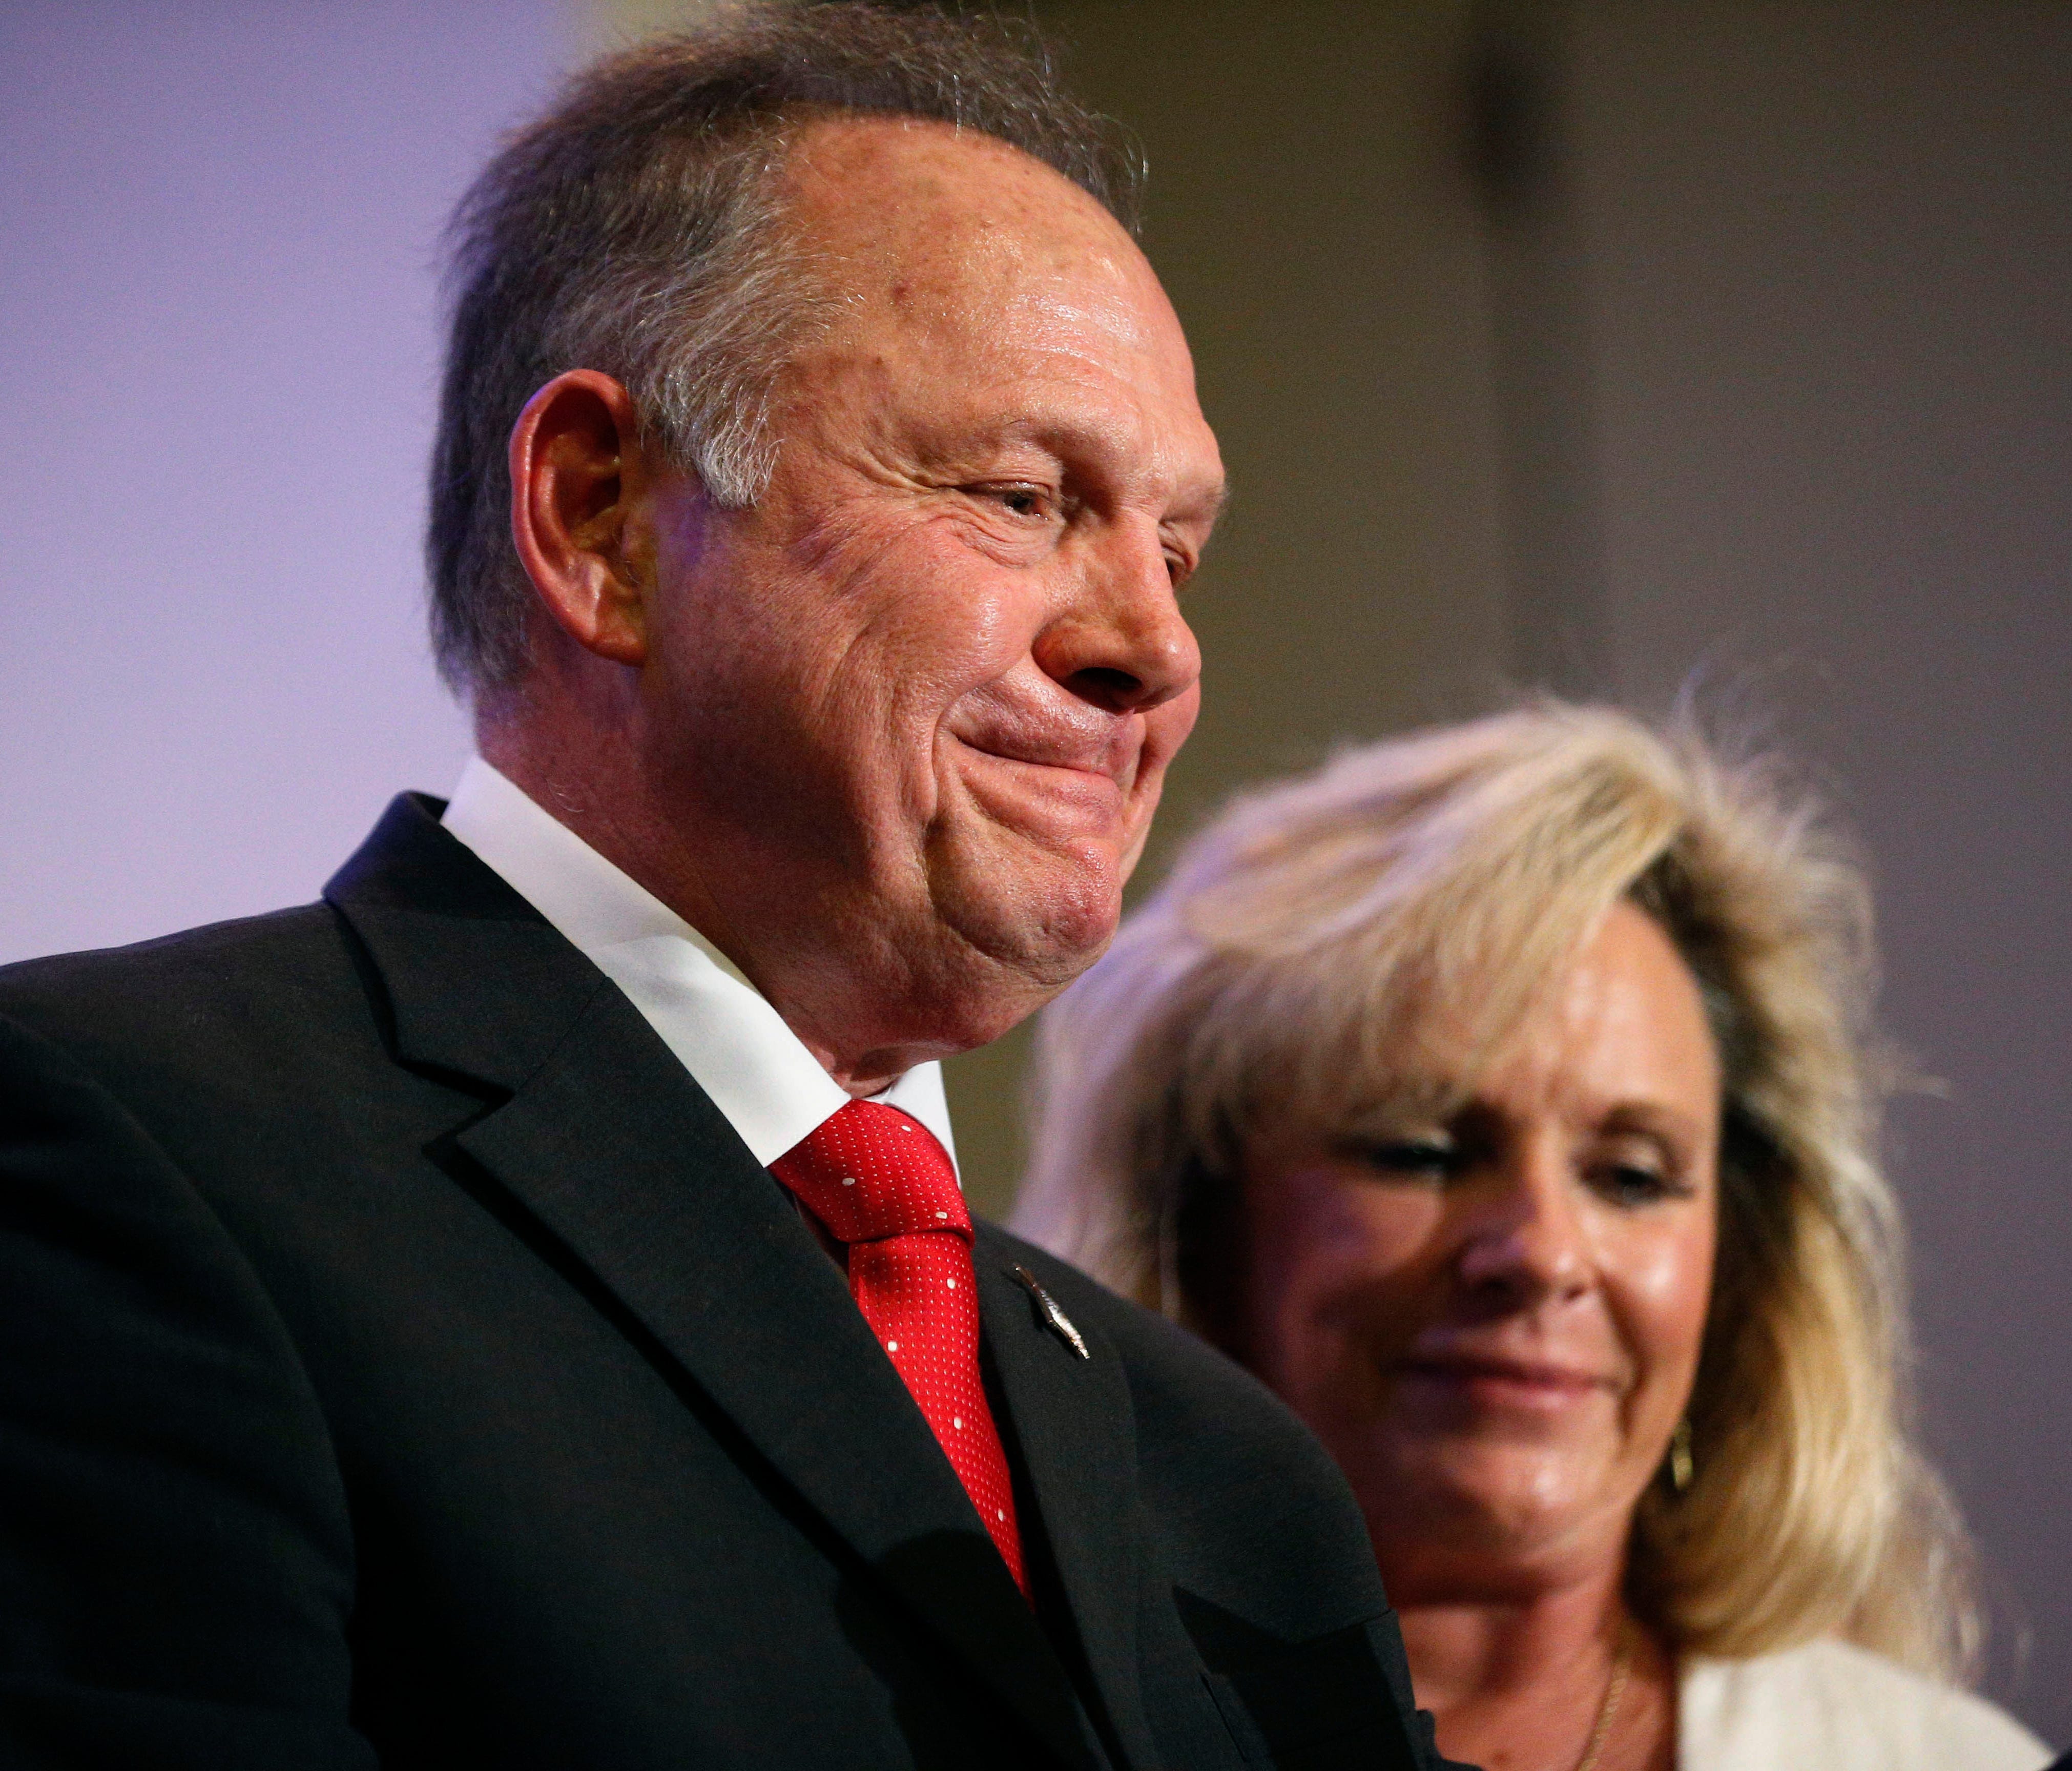 U.S. Senate candidate Roy Moore is pictured speaking at a news conference in Birmingham, Ala., with his wife Kayla Moore.